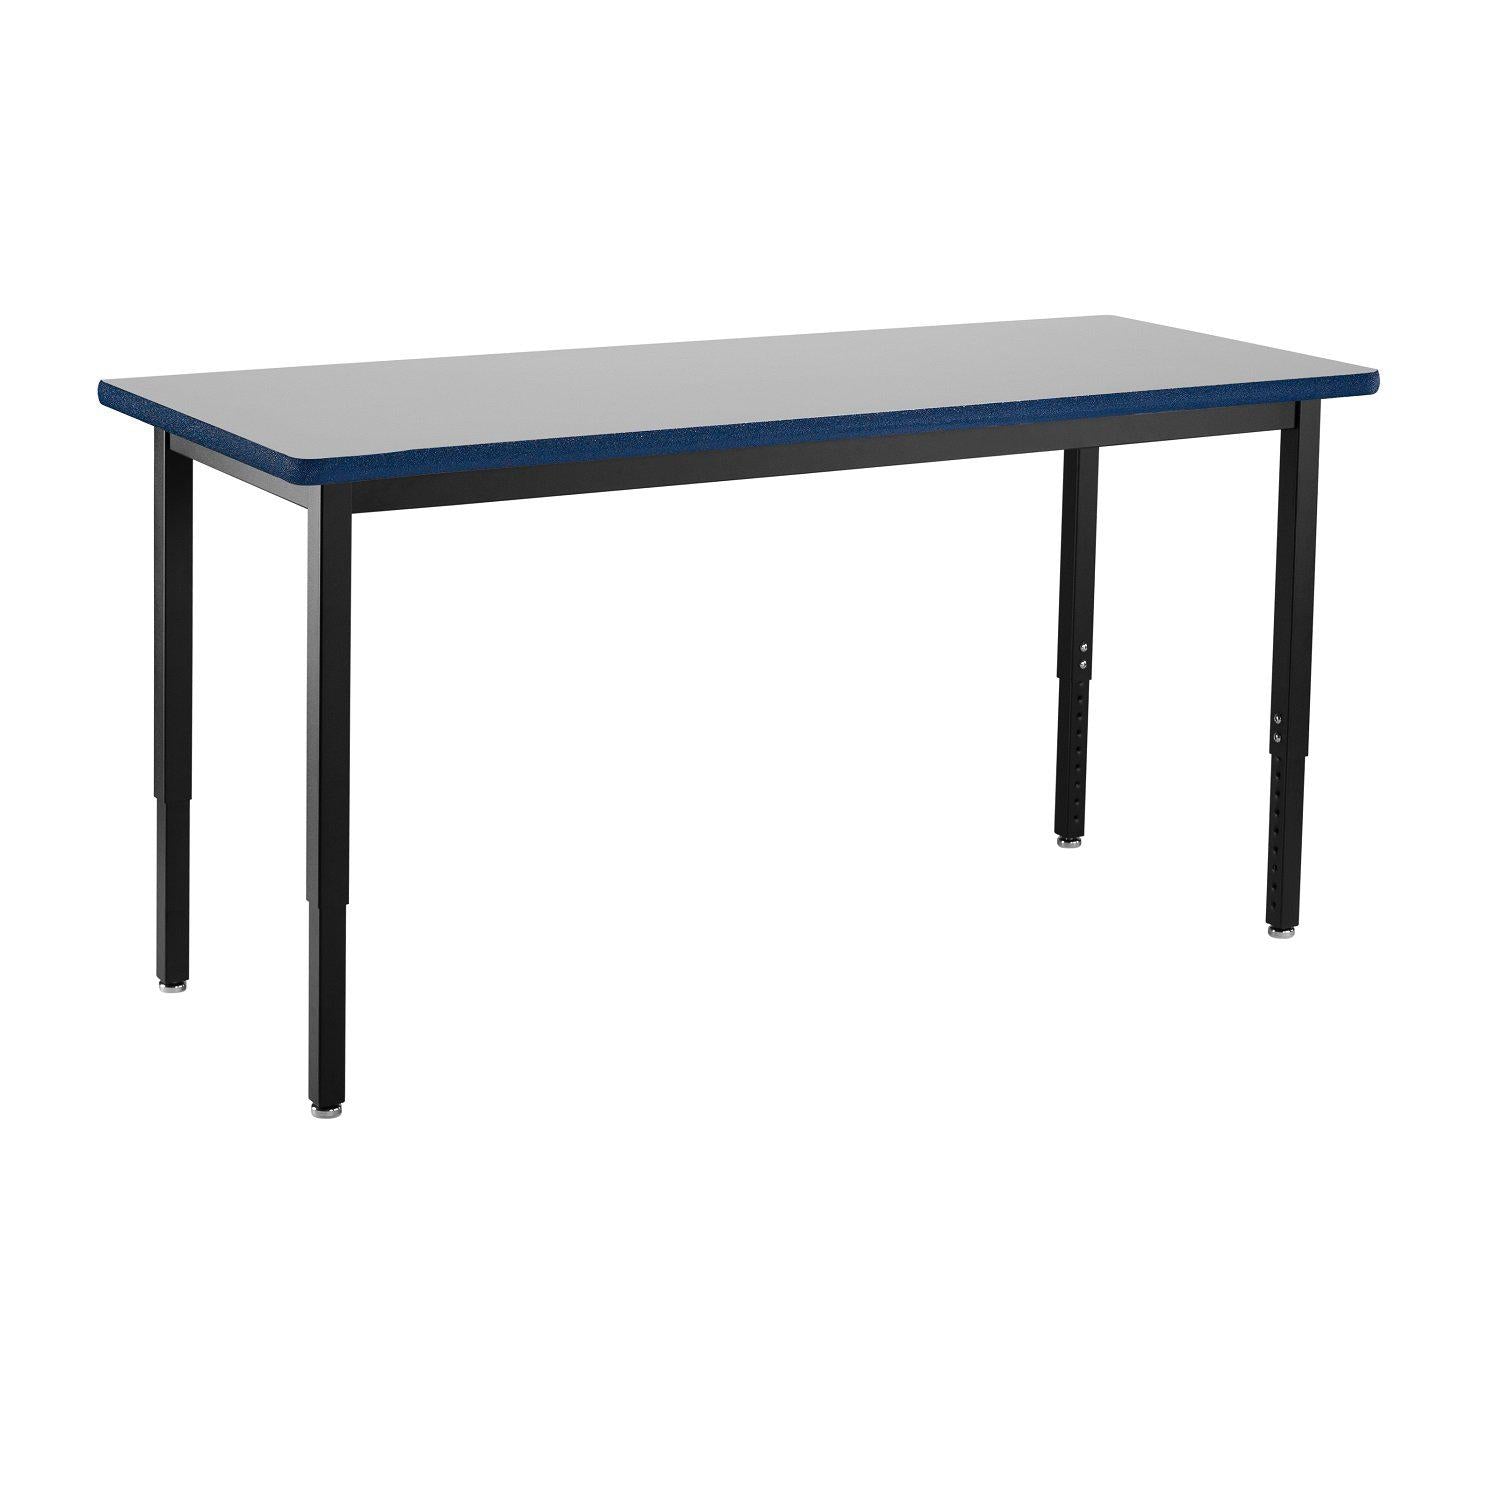 Heavy-Duty Height-Adjustable Utility Table, Black Frame, 24" x 60", Supreme High-Pressure Laminate Top with Black ProtectEdge